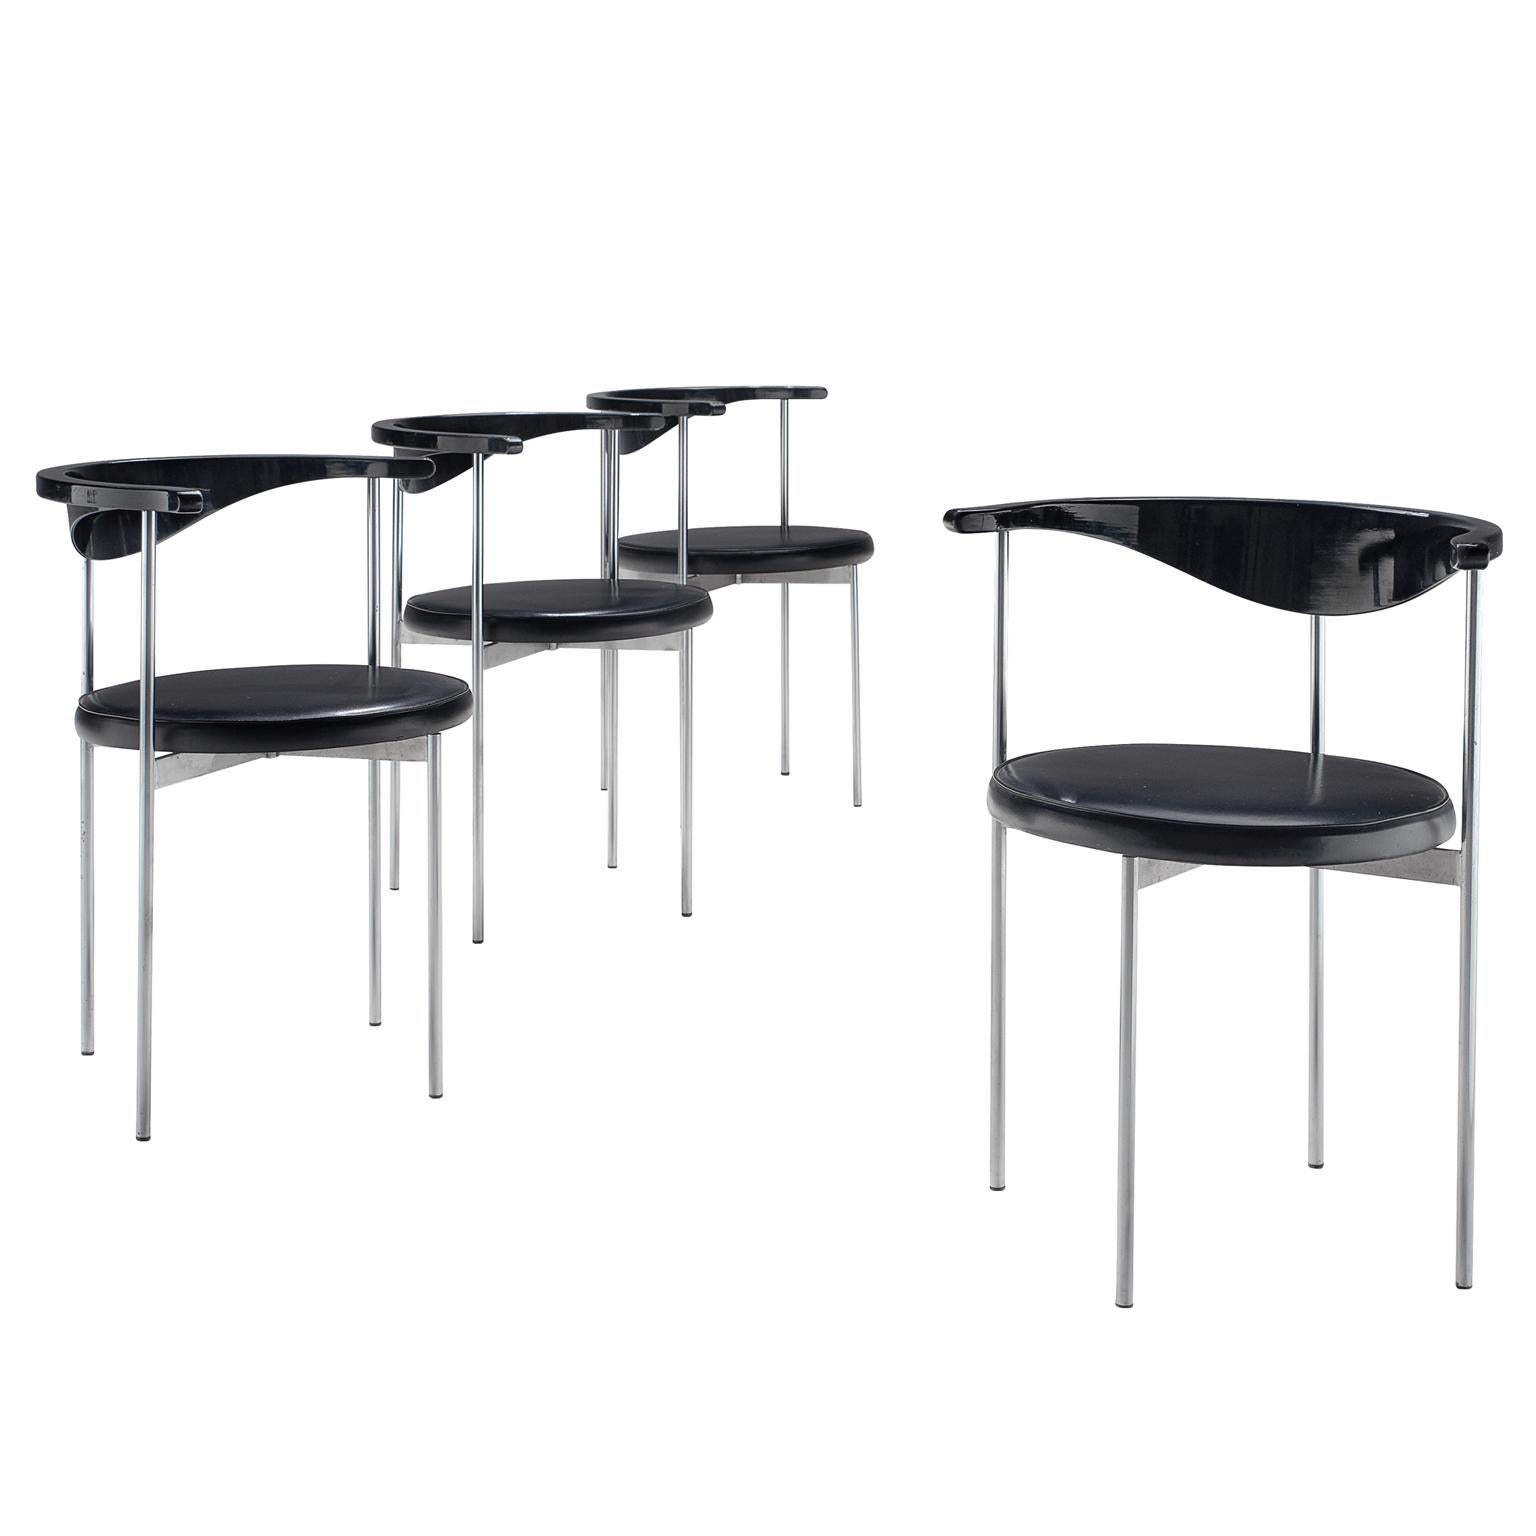 Frederik Sieck Set of Four Dining Chairs